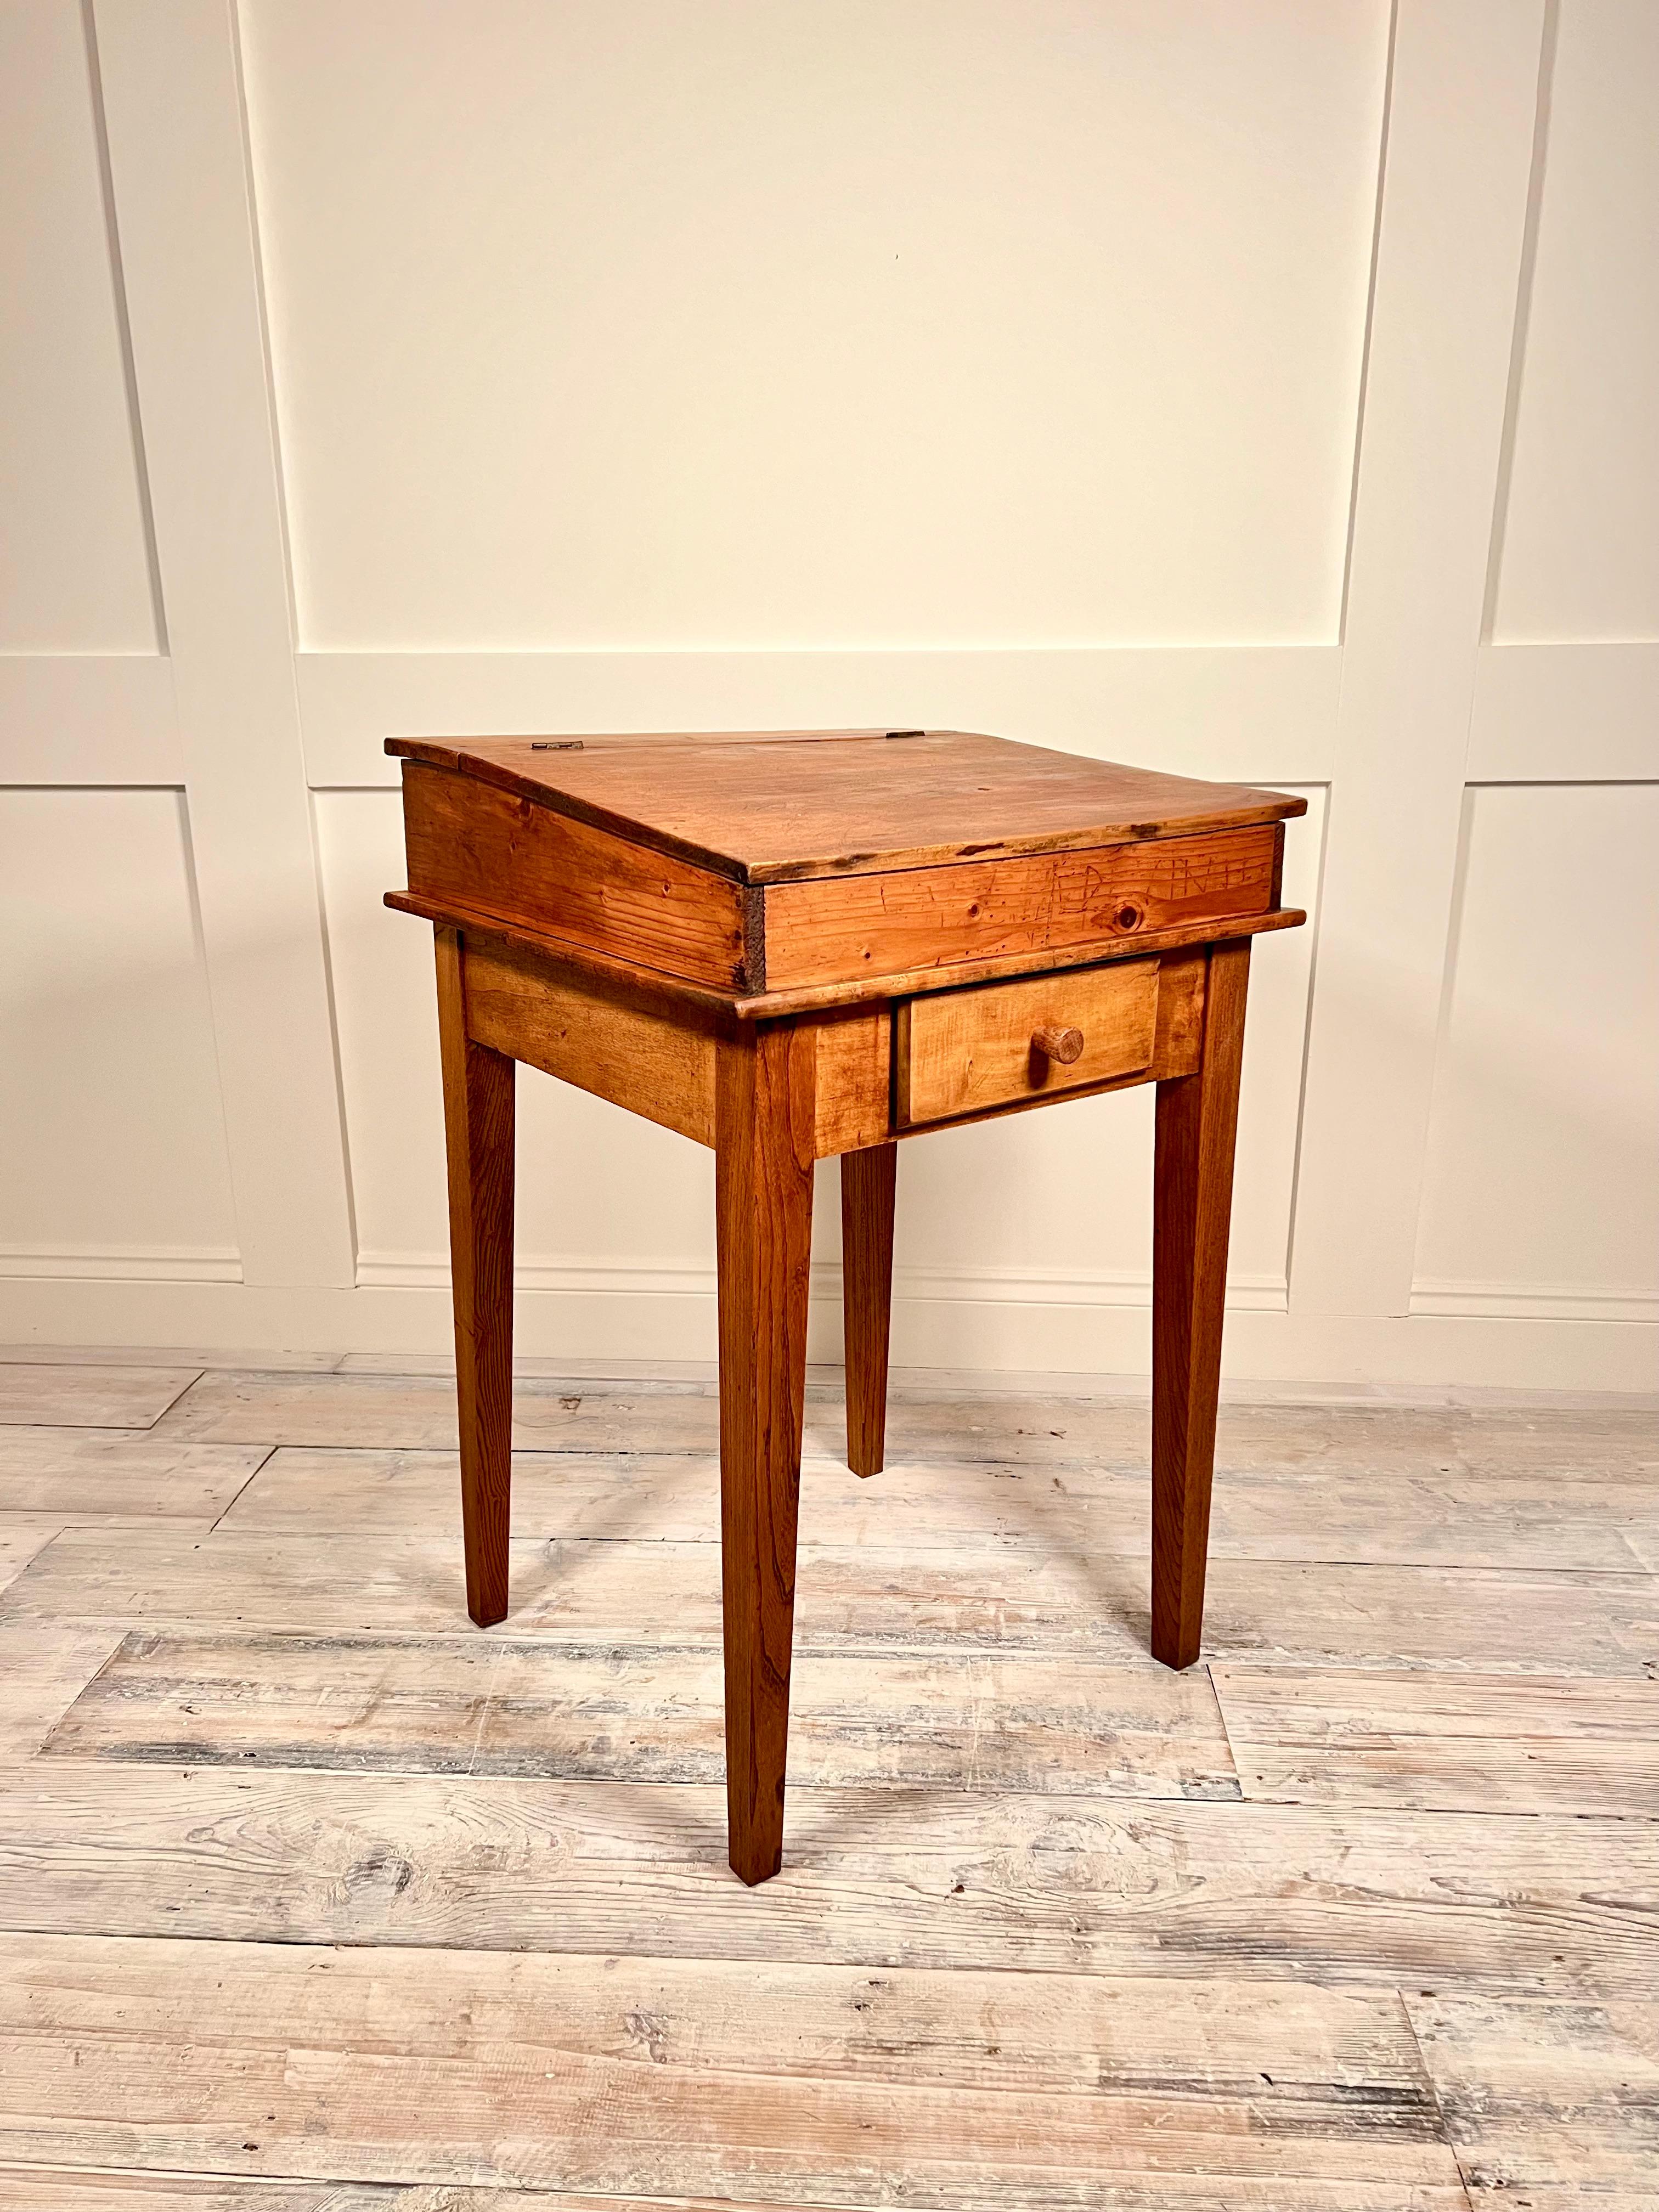 This French 1900's Oak child's school desk is a rare find that exudes immense character. The desk bears the markings of many children who have used it over the years, adding to its charm. Inside the small front drawer and fold-up top storage area,